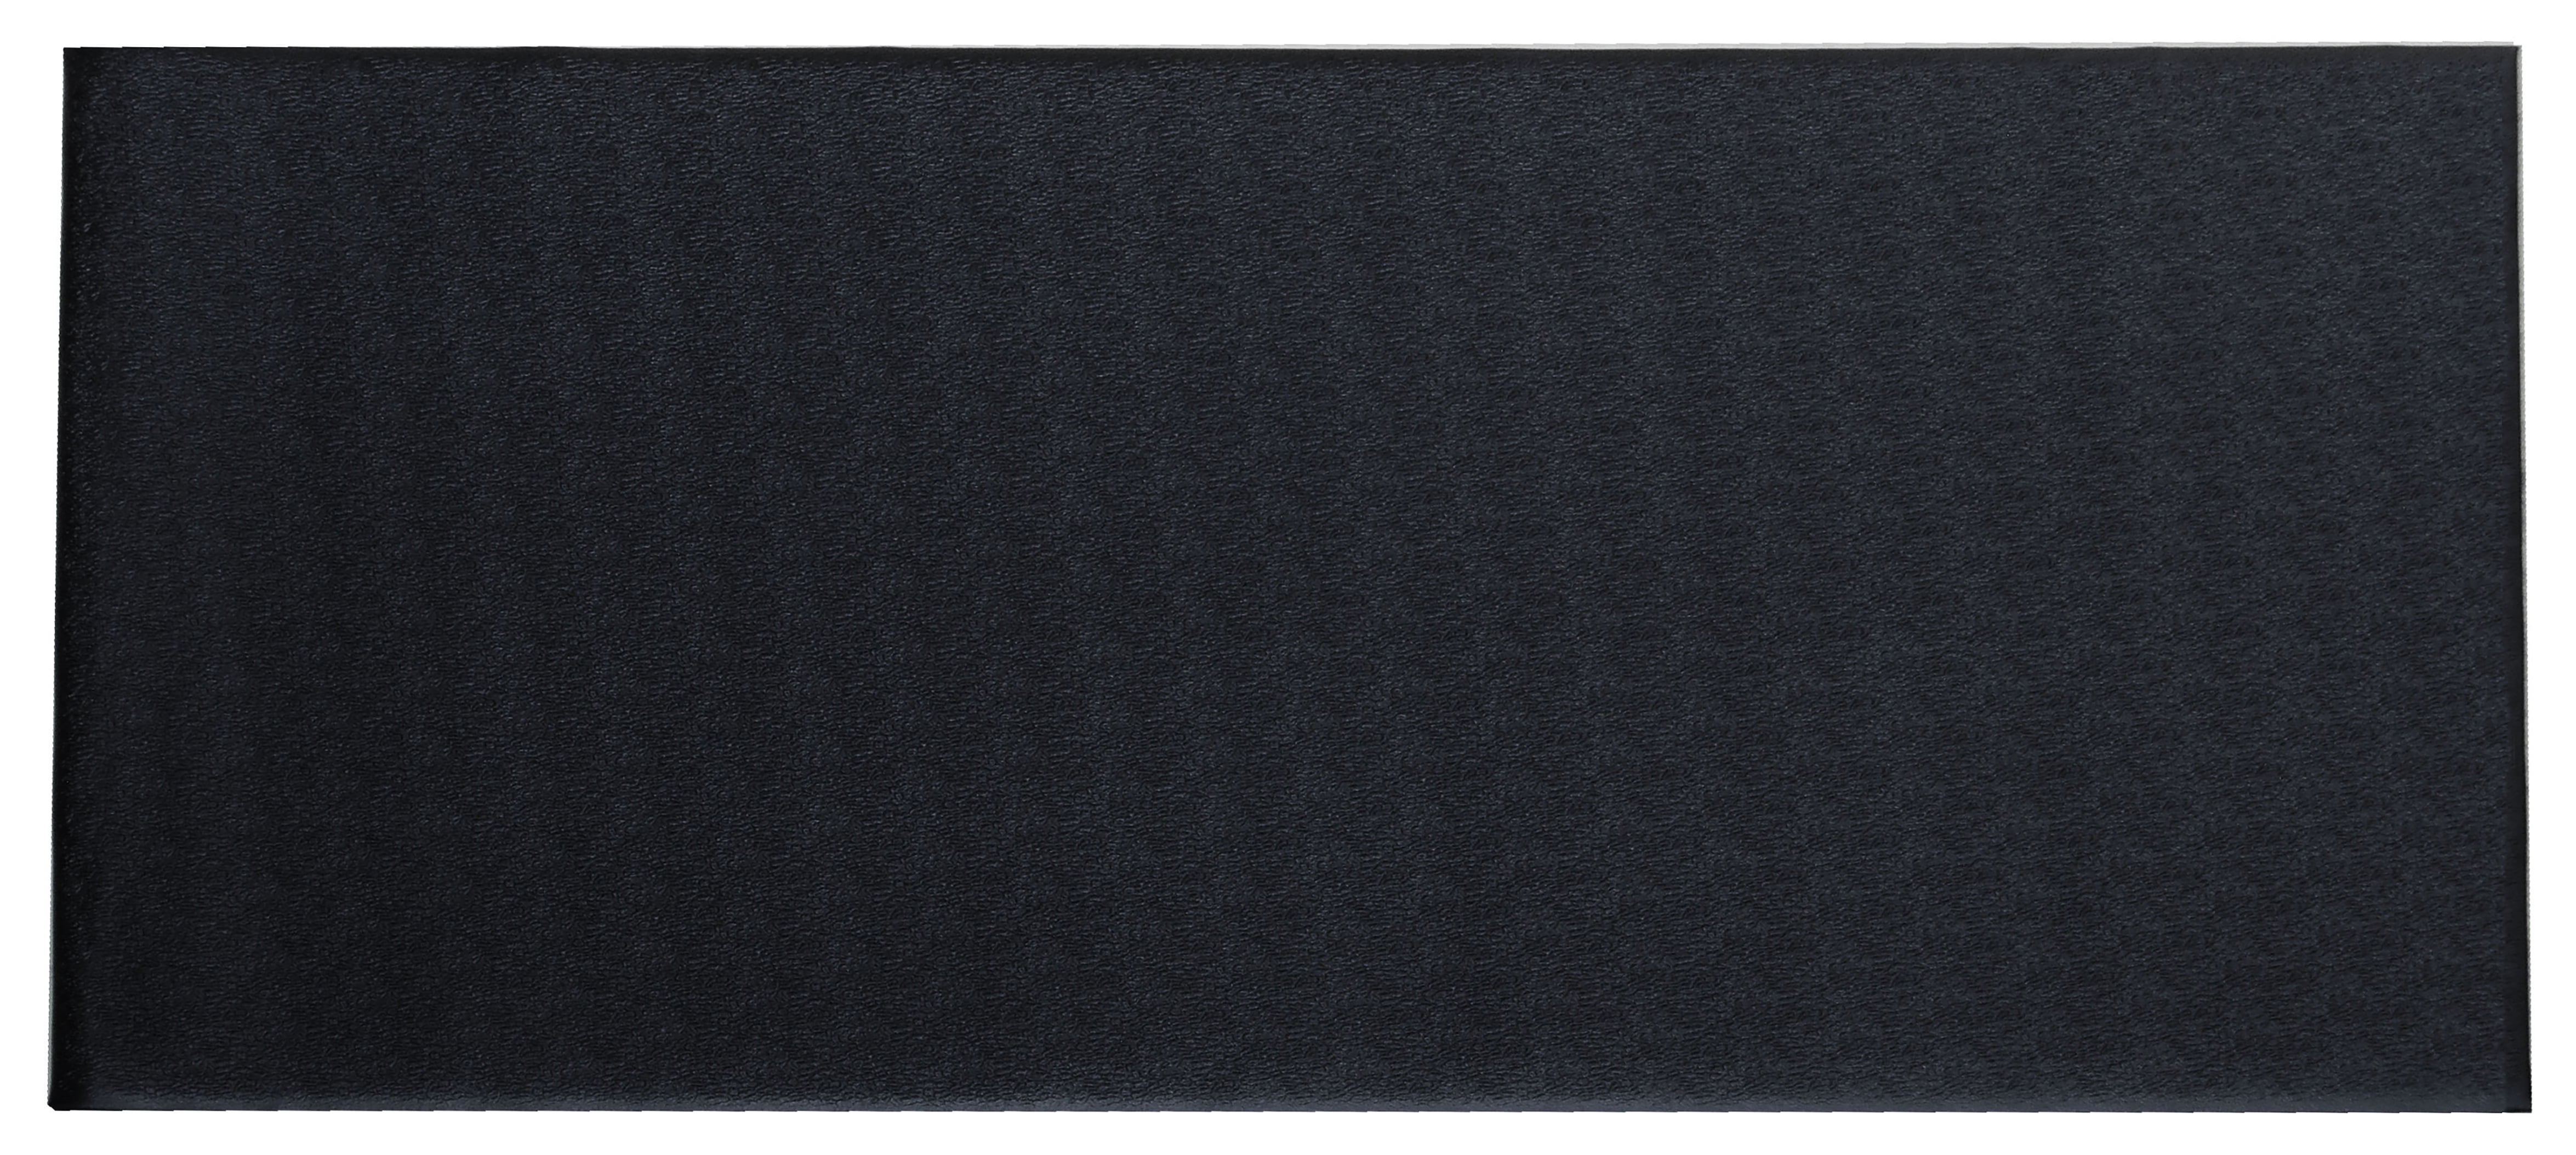 For Large Treadmills Elli Details about   Supermats Heavy Duty Equipment Mat 11Gs Made In U.S.A 